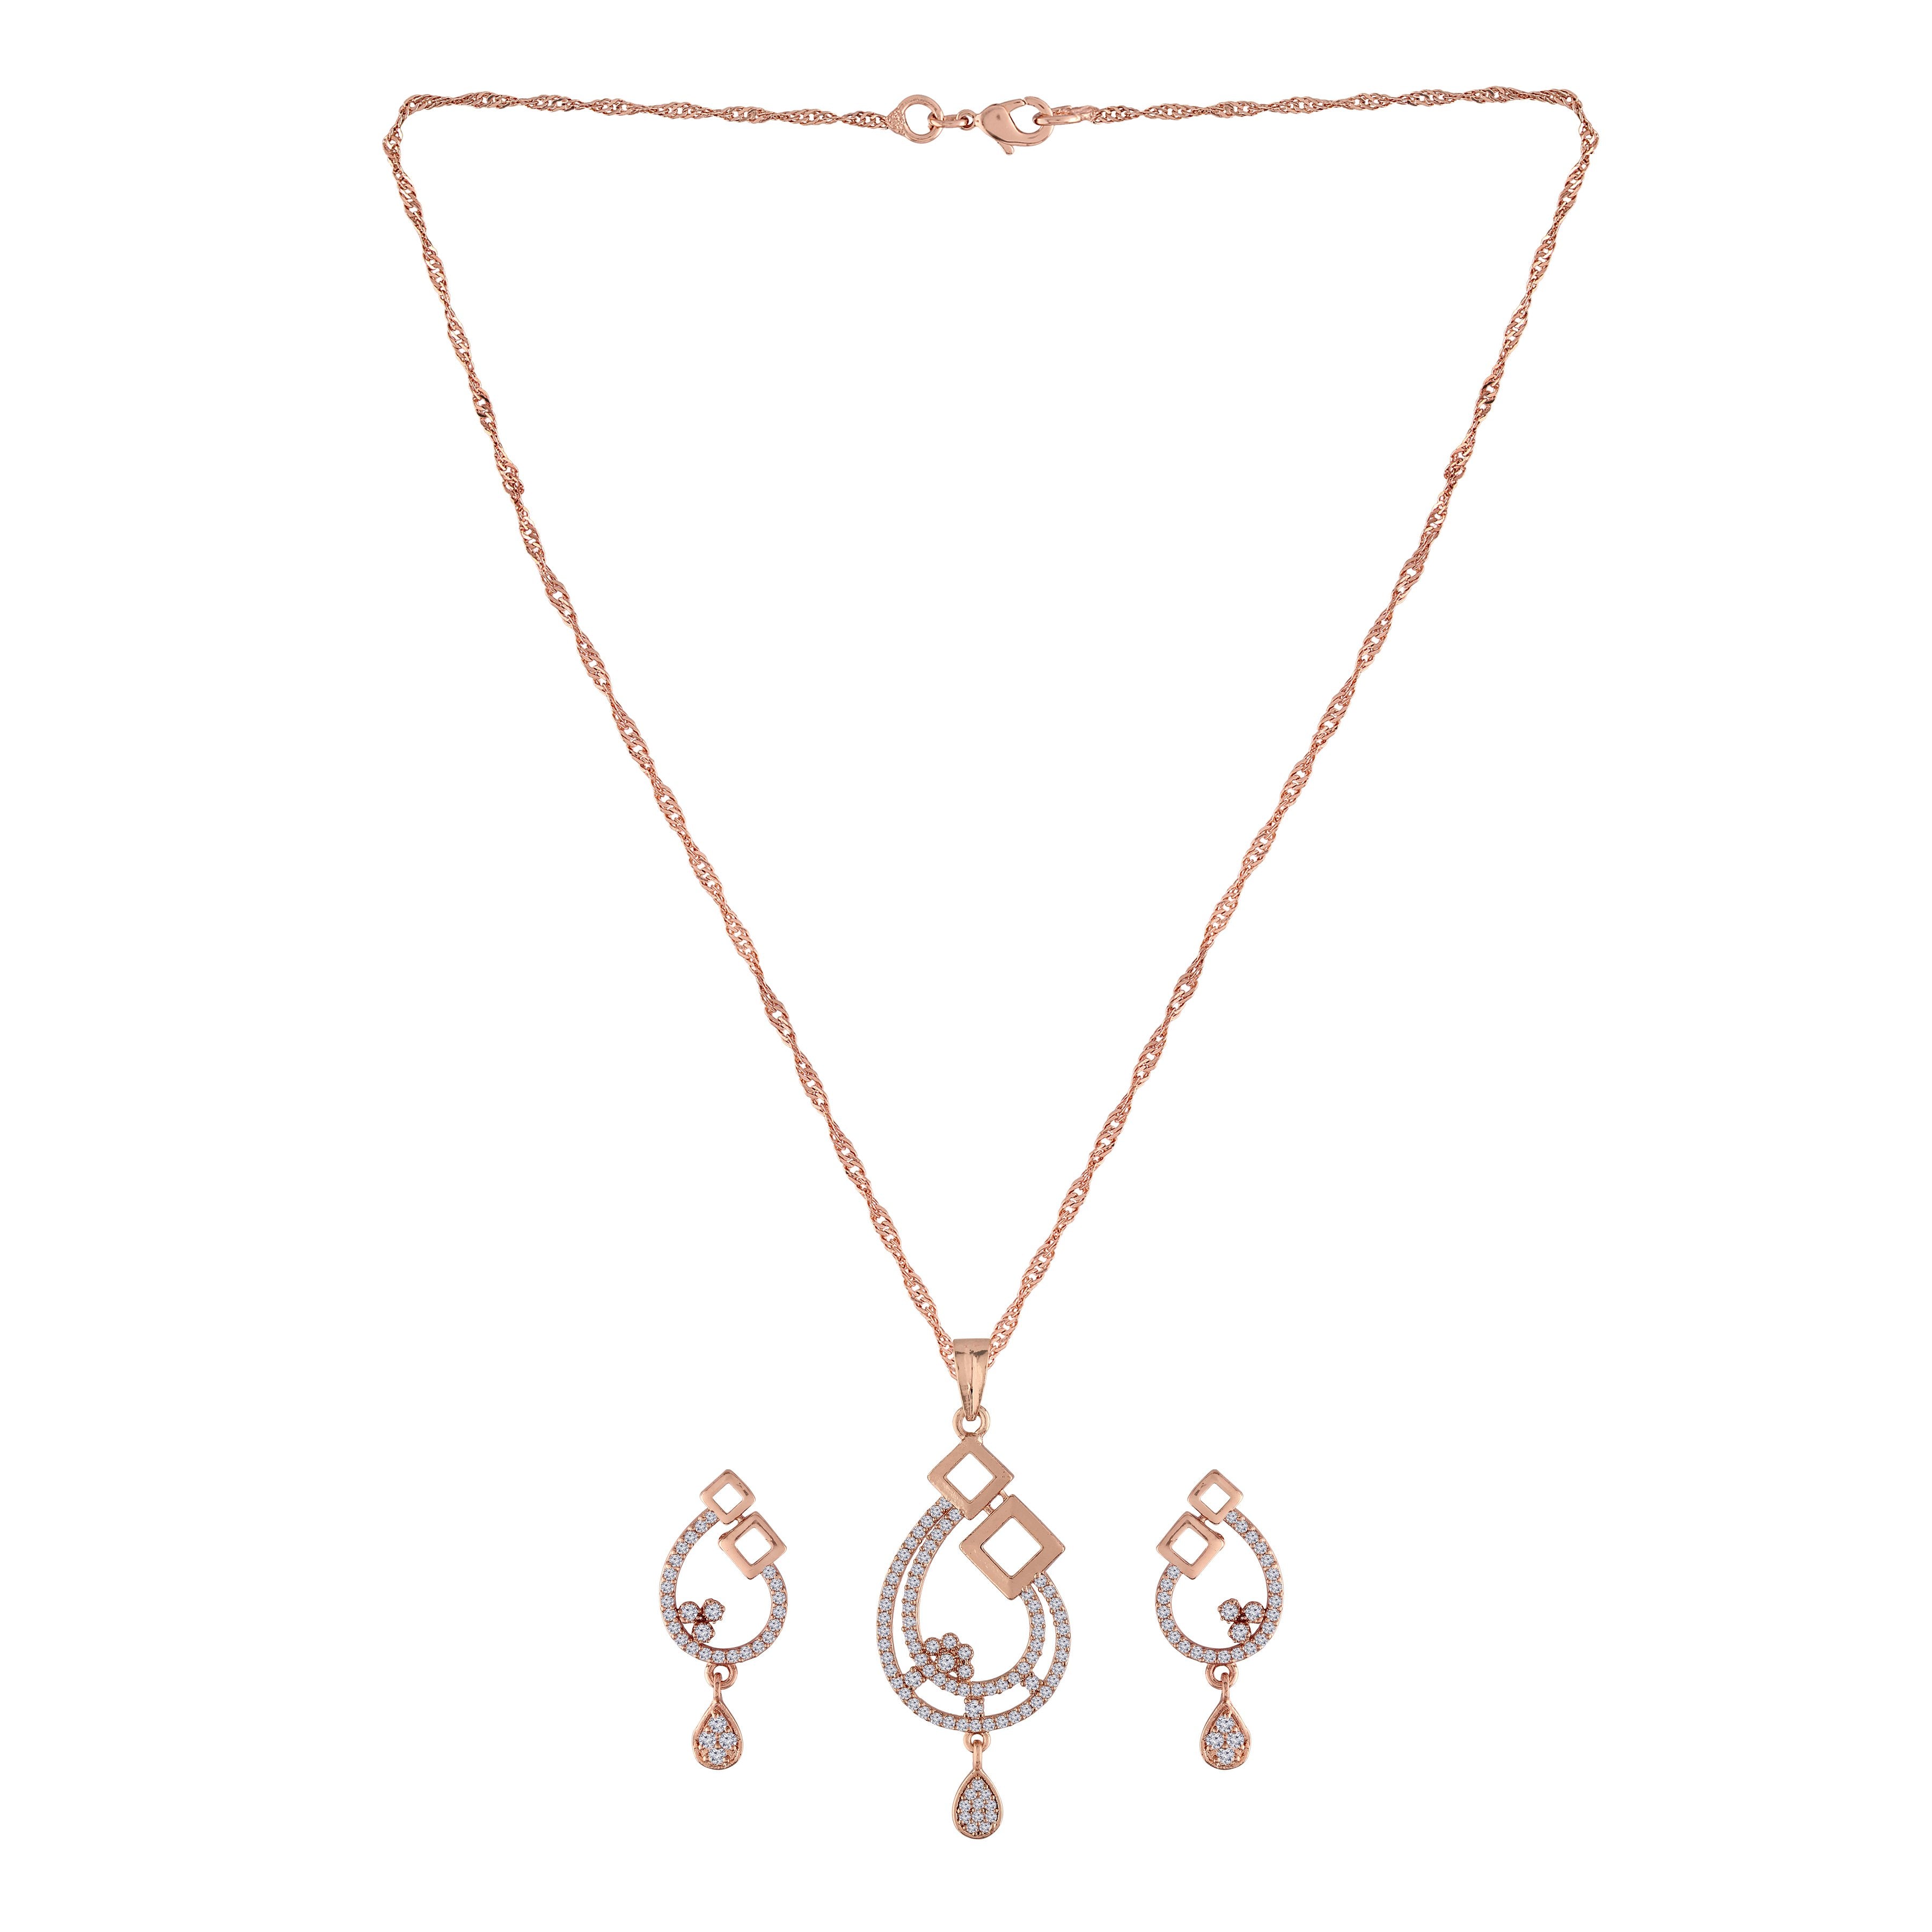 Women's 18k Rose Gold Plated Pearl & Cubic Zirconia Twisted Pendant Necklace Set with Earrings - I Jewels